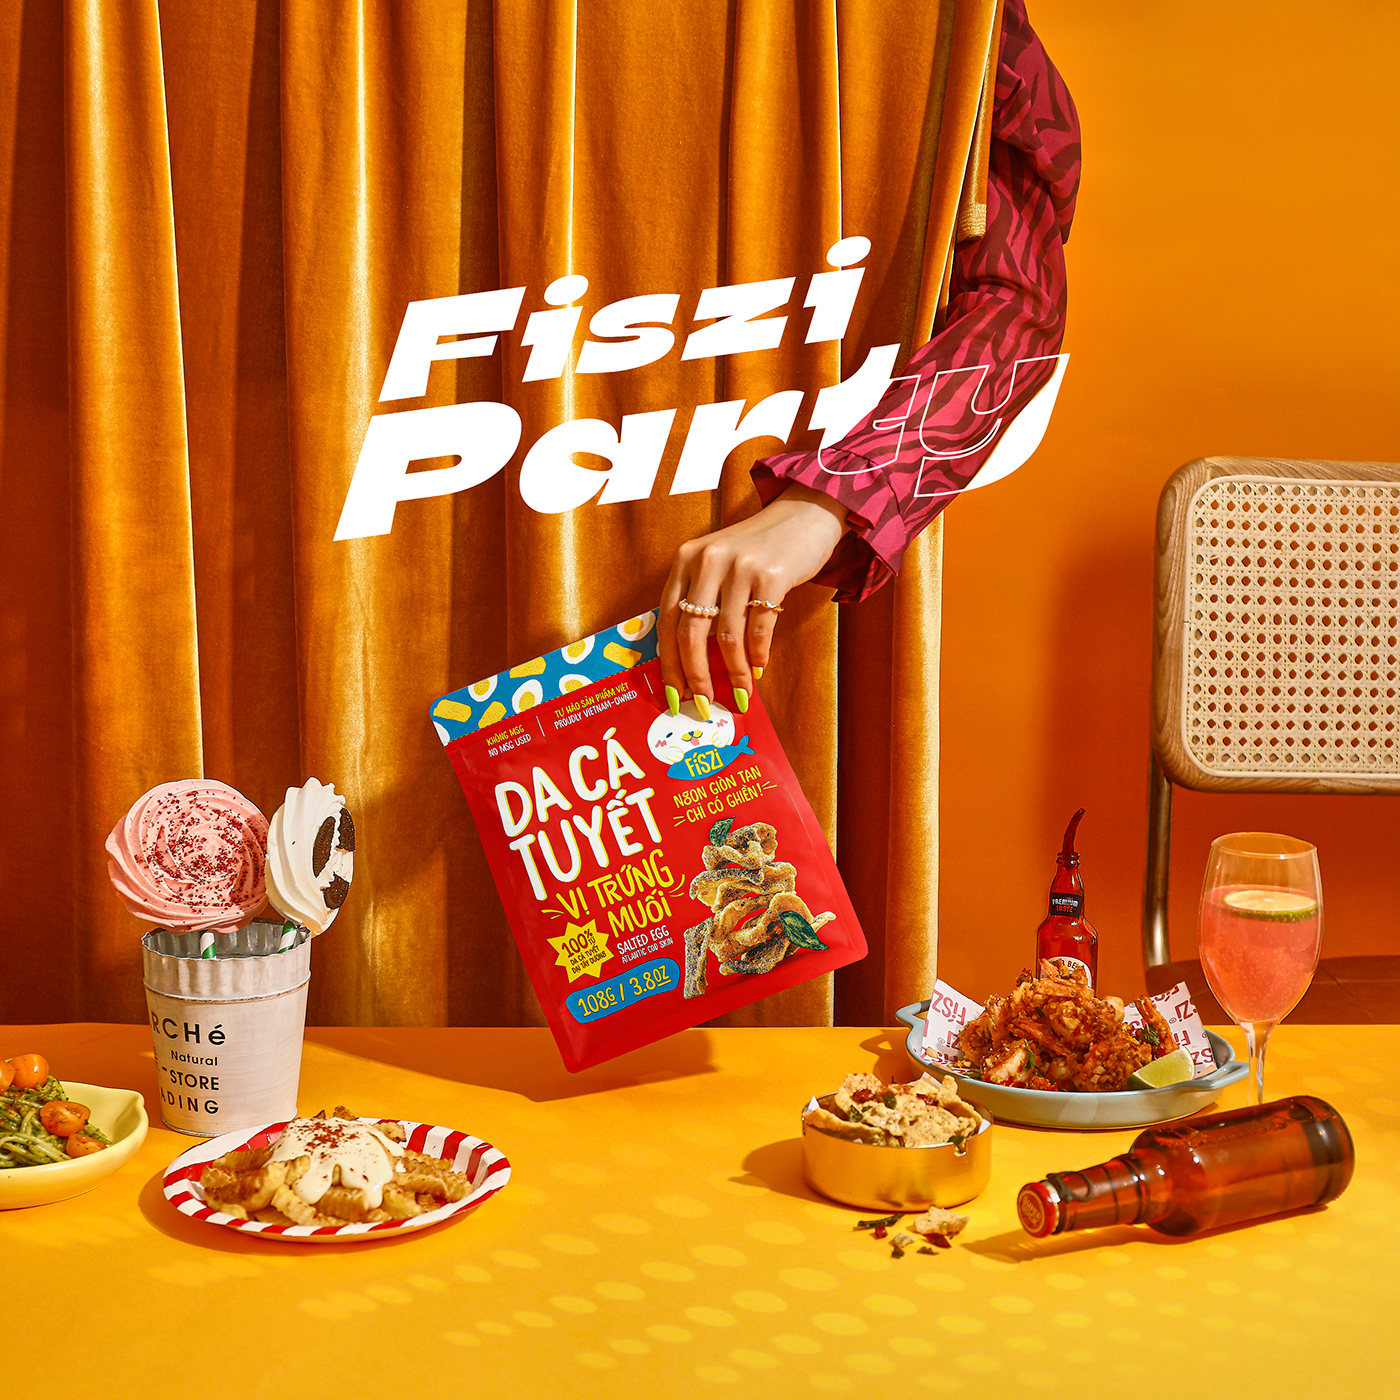 art fish skin party popart product snack still life